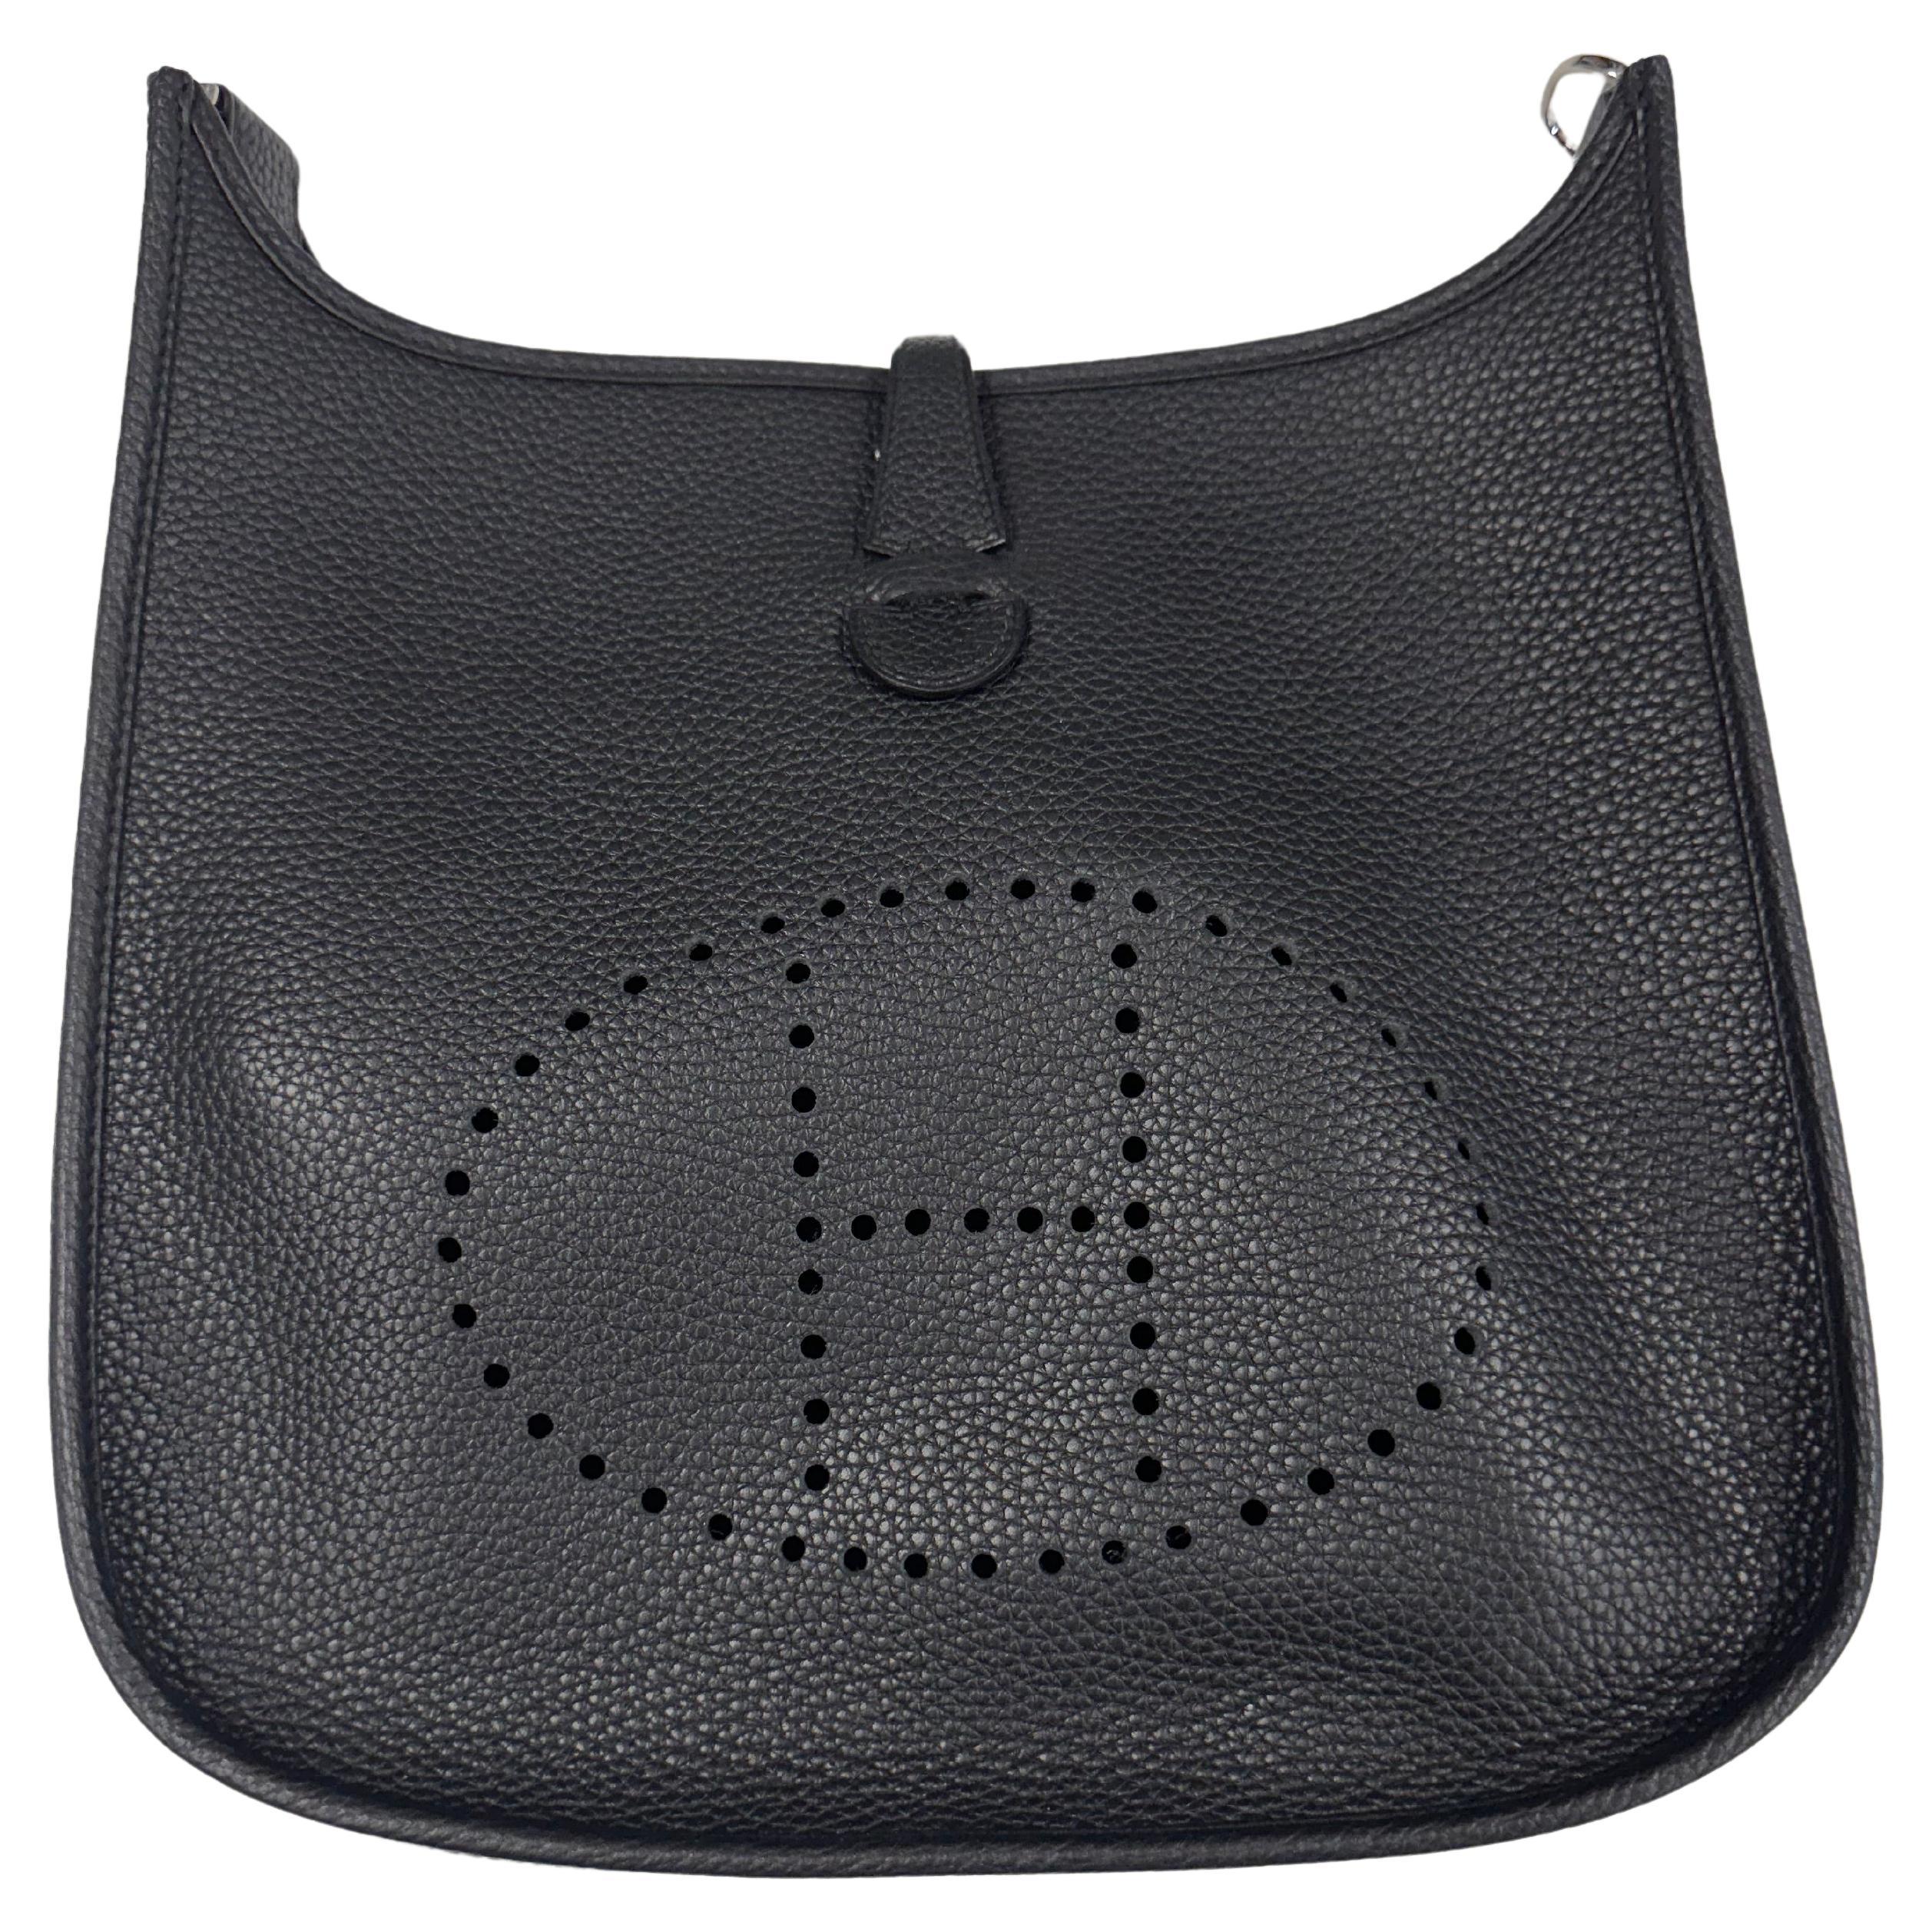 Supple leather, quiet luxury Evelyn bag is an understated Hermes classic.

Color: Black
Material: Leather
Measures: Height 11” x Length 21” x Depth 2”
Drop: 20” (strap)
Comes with: Dust bag
Condition: Very good. Faint marks throughout.

Made in